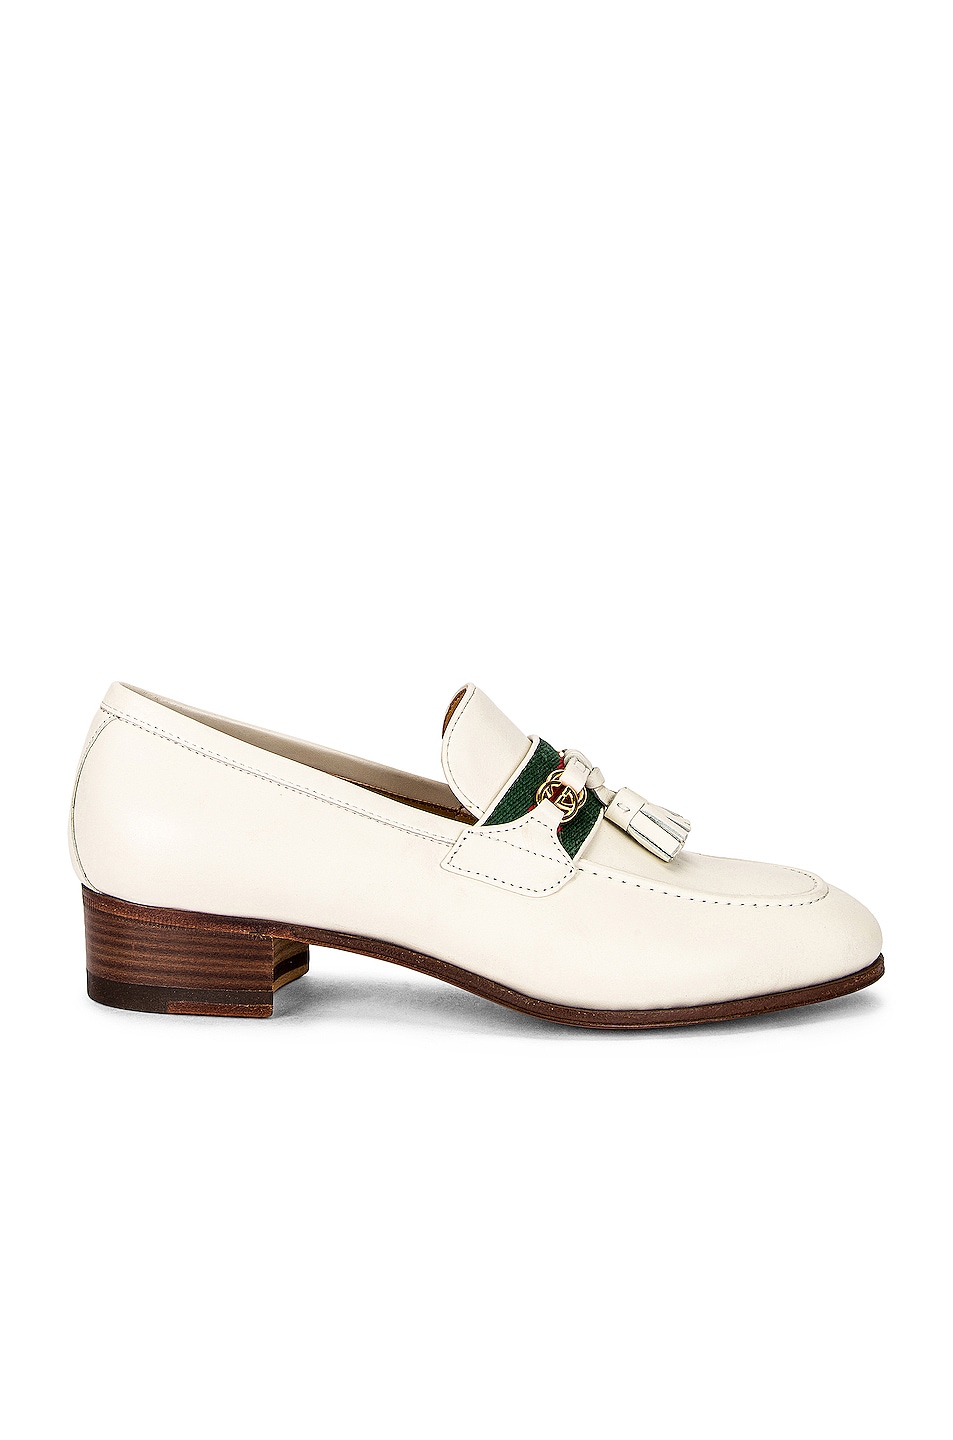 Image 1 of Gucci Paride Leather Moccasins in Dusty White